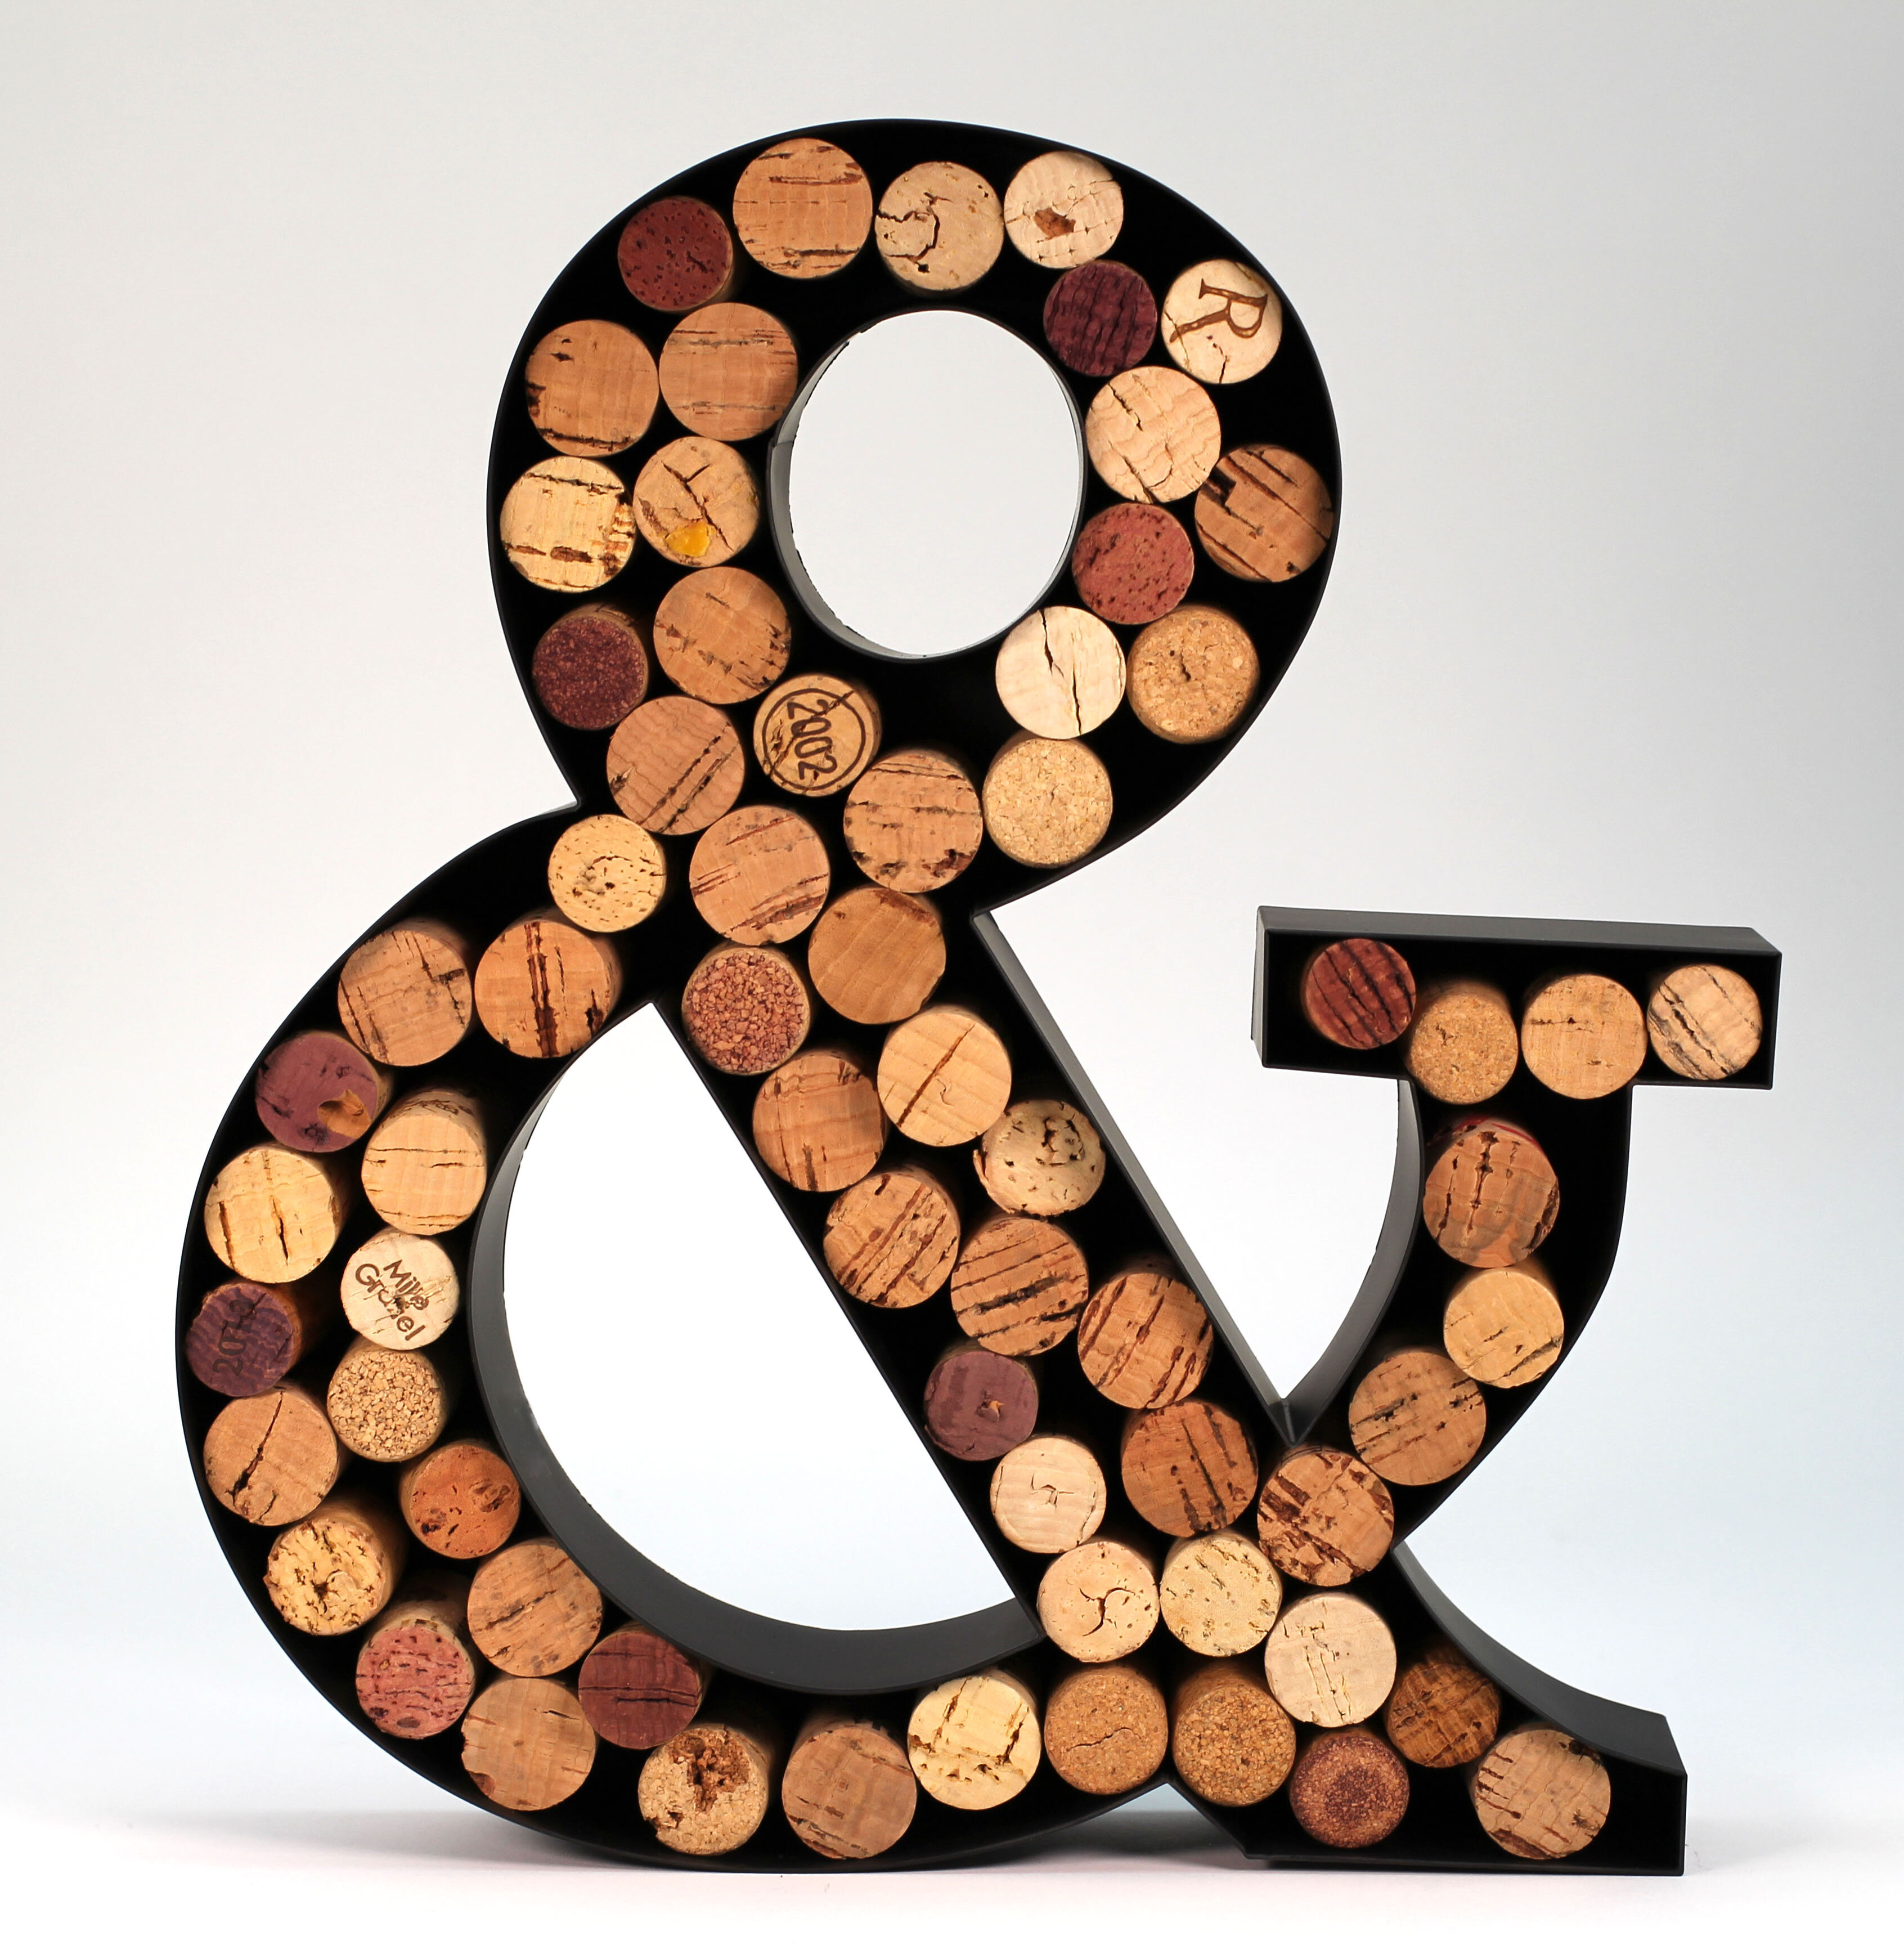 Wine Decor or Wine Cork Holder Decor Will Brighten Up Kitchen! Wine Cork Holder Makes for Great Wine Accessories Perfect Monogrammed Gifts for Women to Store Wine Corks Ampersand &